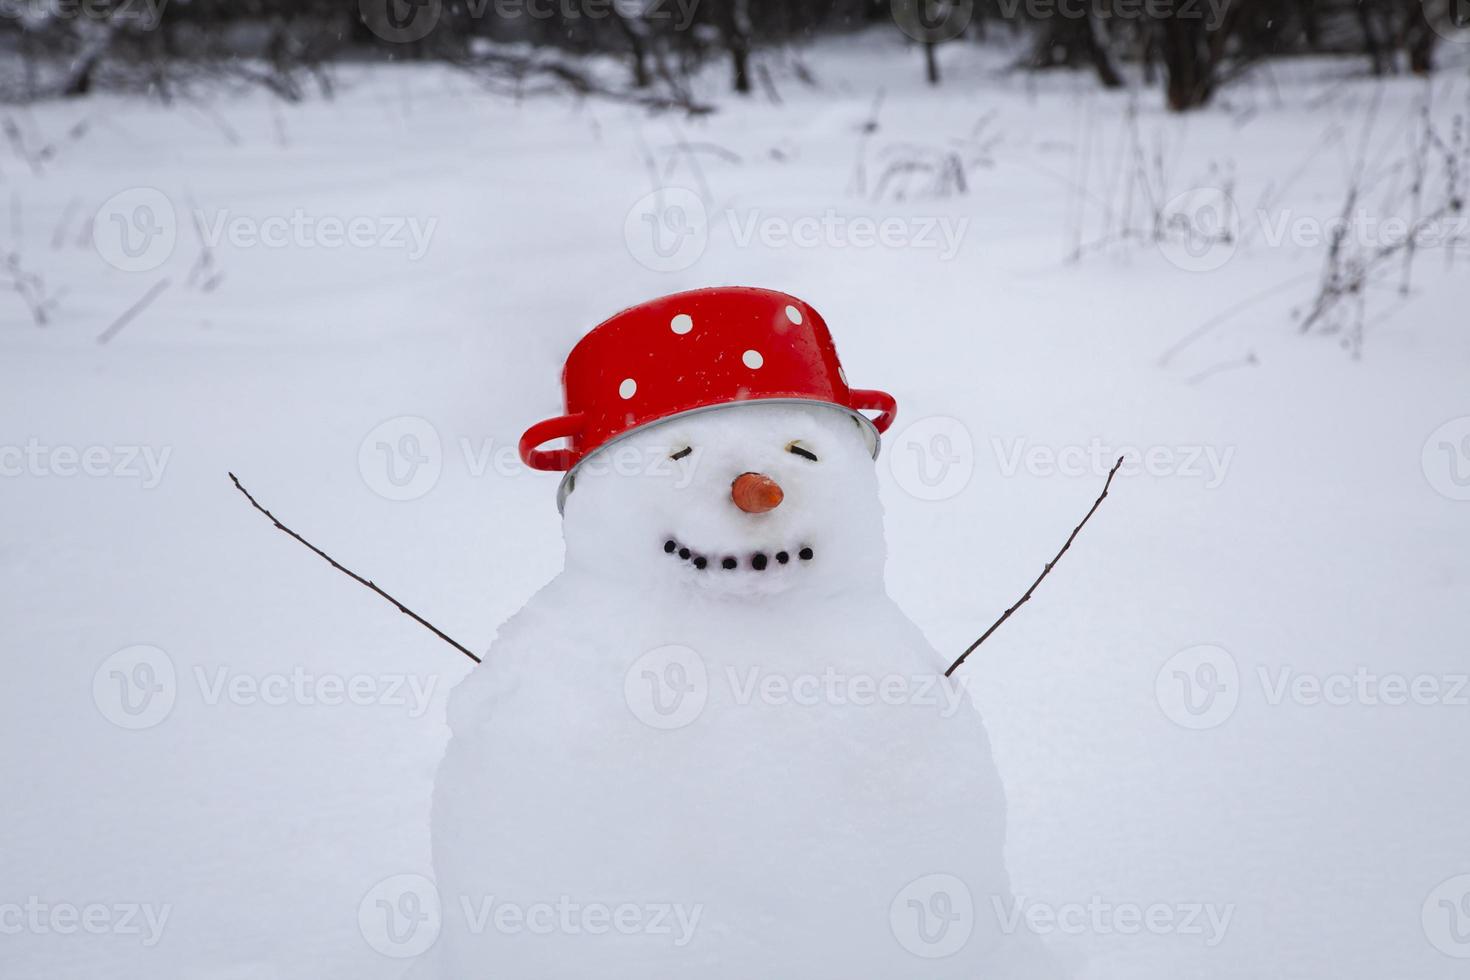 Funny snowman in a red soup pot with white dots instead of a hat, a cute snowman stands in a winter village, snow-covered trees photo